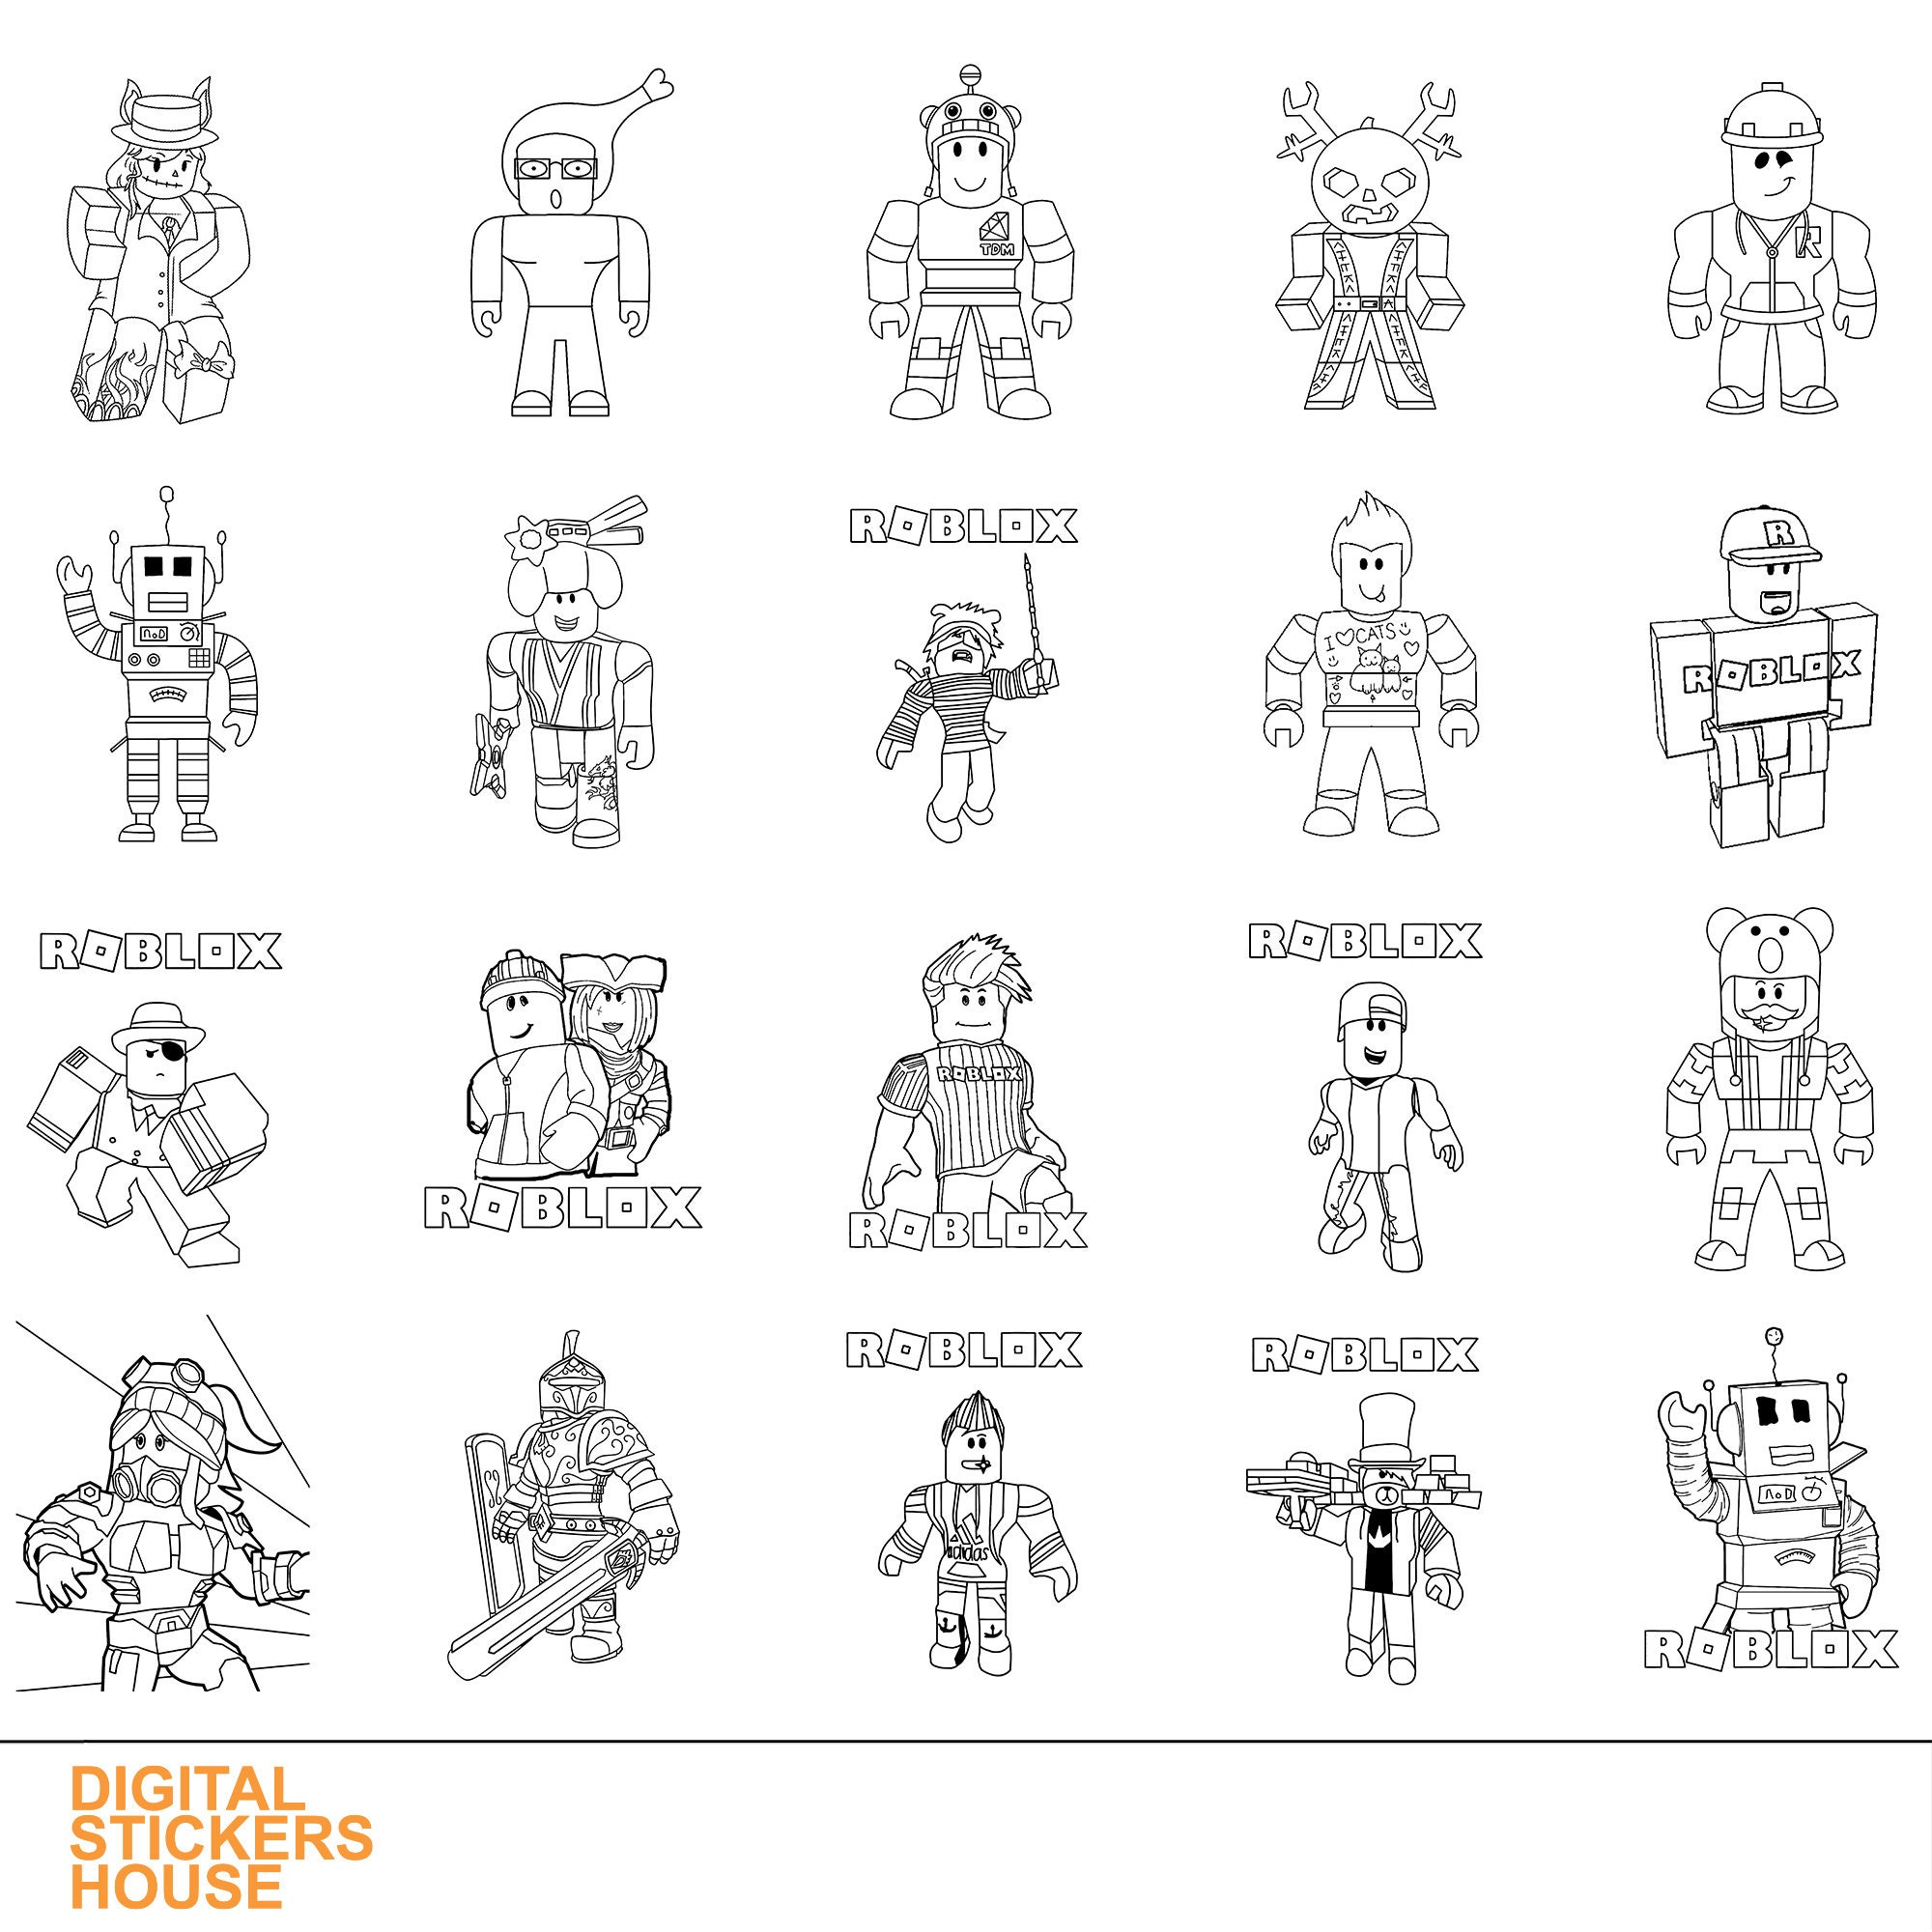 Roblox Printable Coloring Page. 20 Coloring Pages. PDF and | Etsy